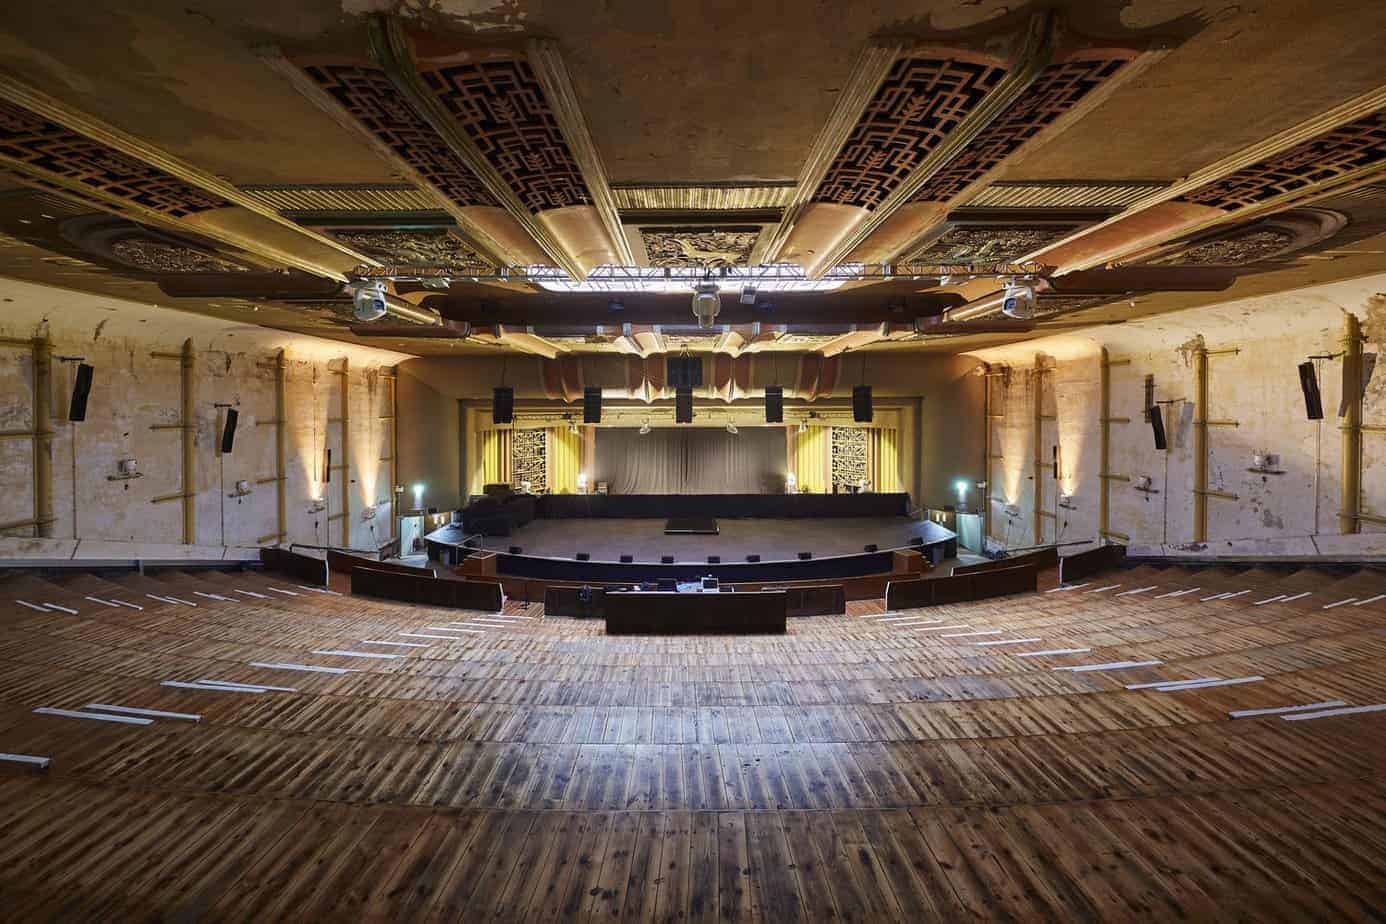 Former cinema room with Art Deco accents